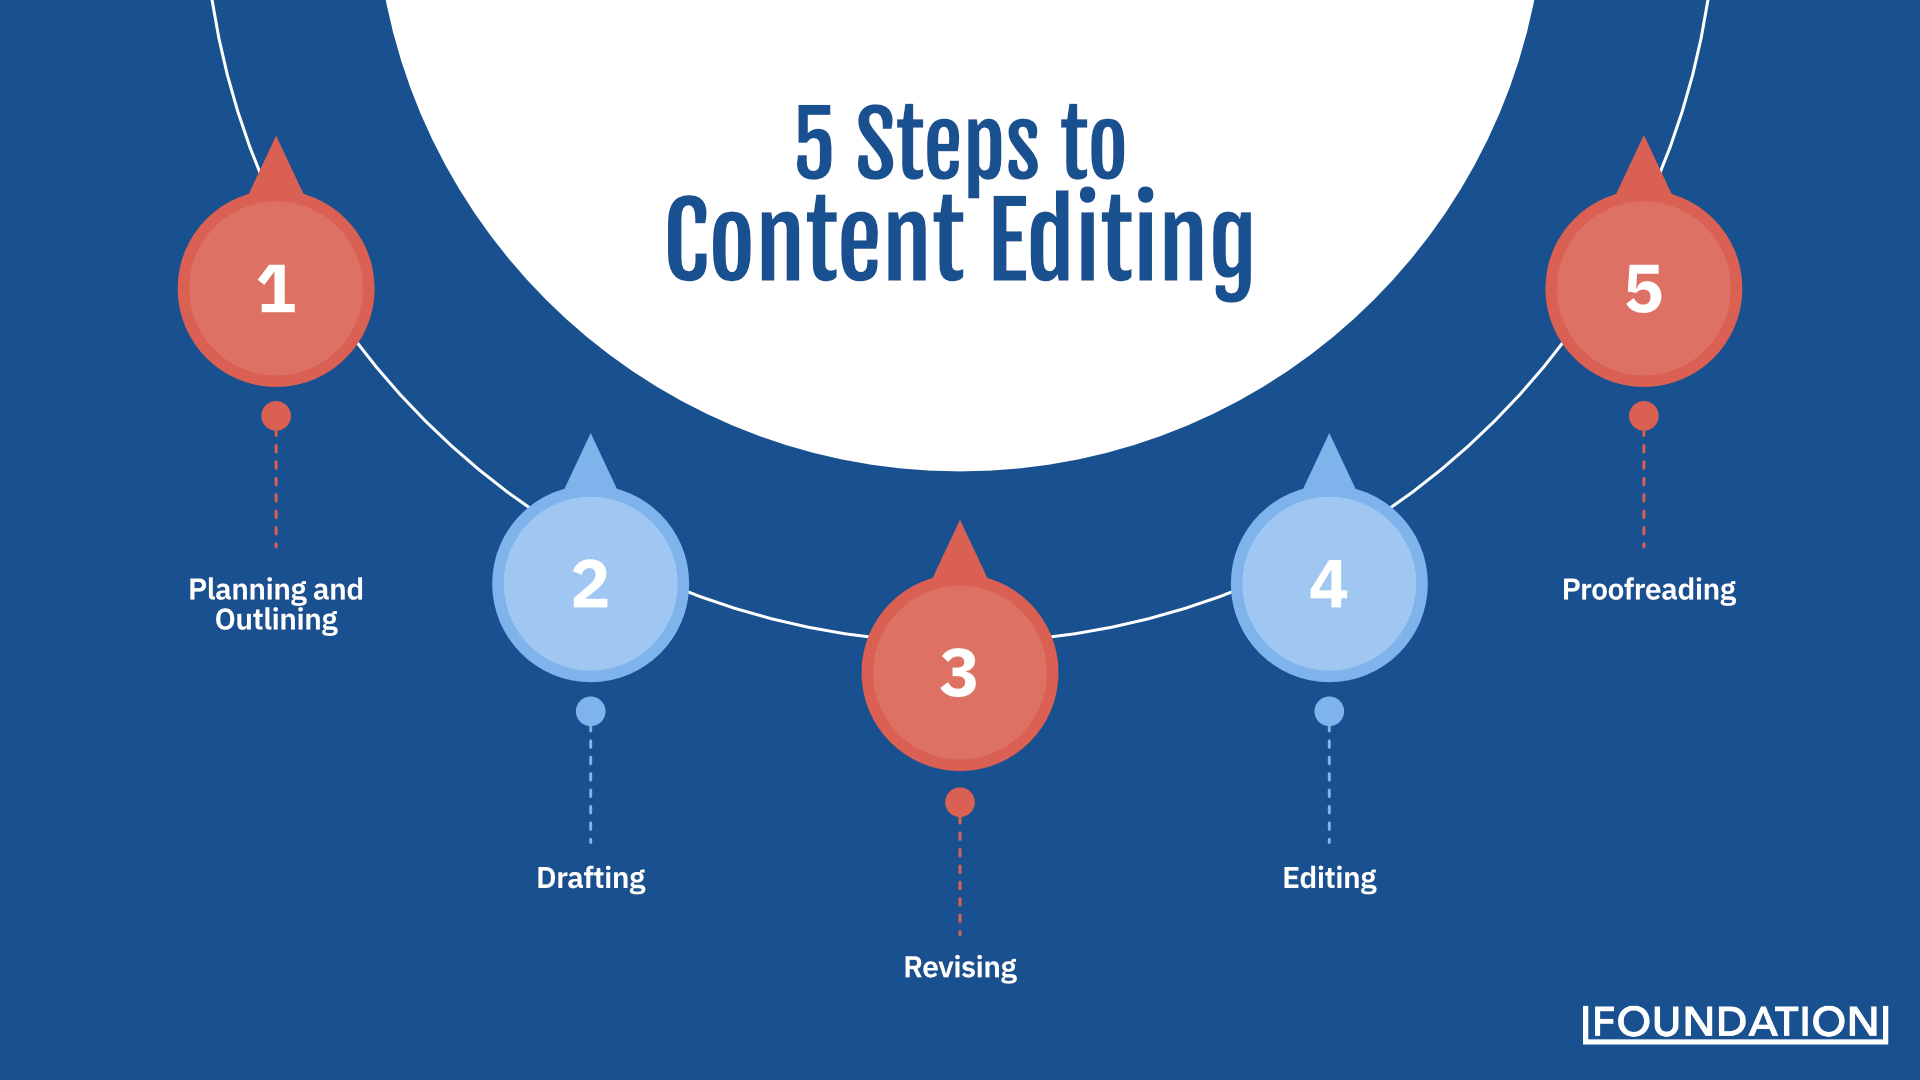 The 5 steps to content editing: planning and outlining, drafting, revising, editing, and proofreading